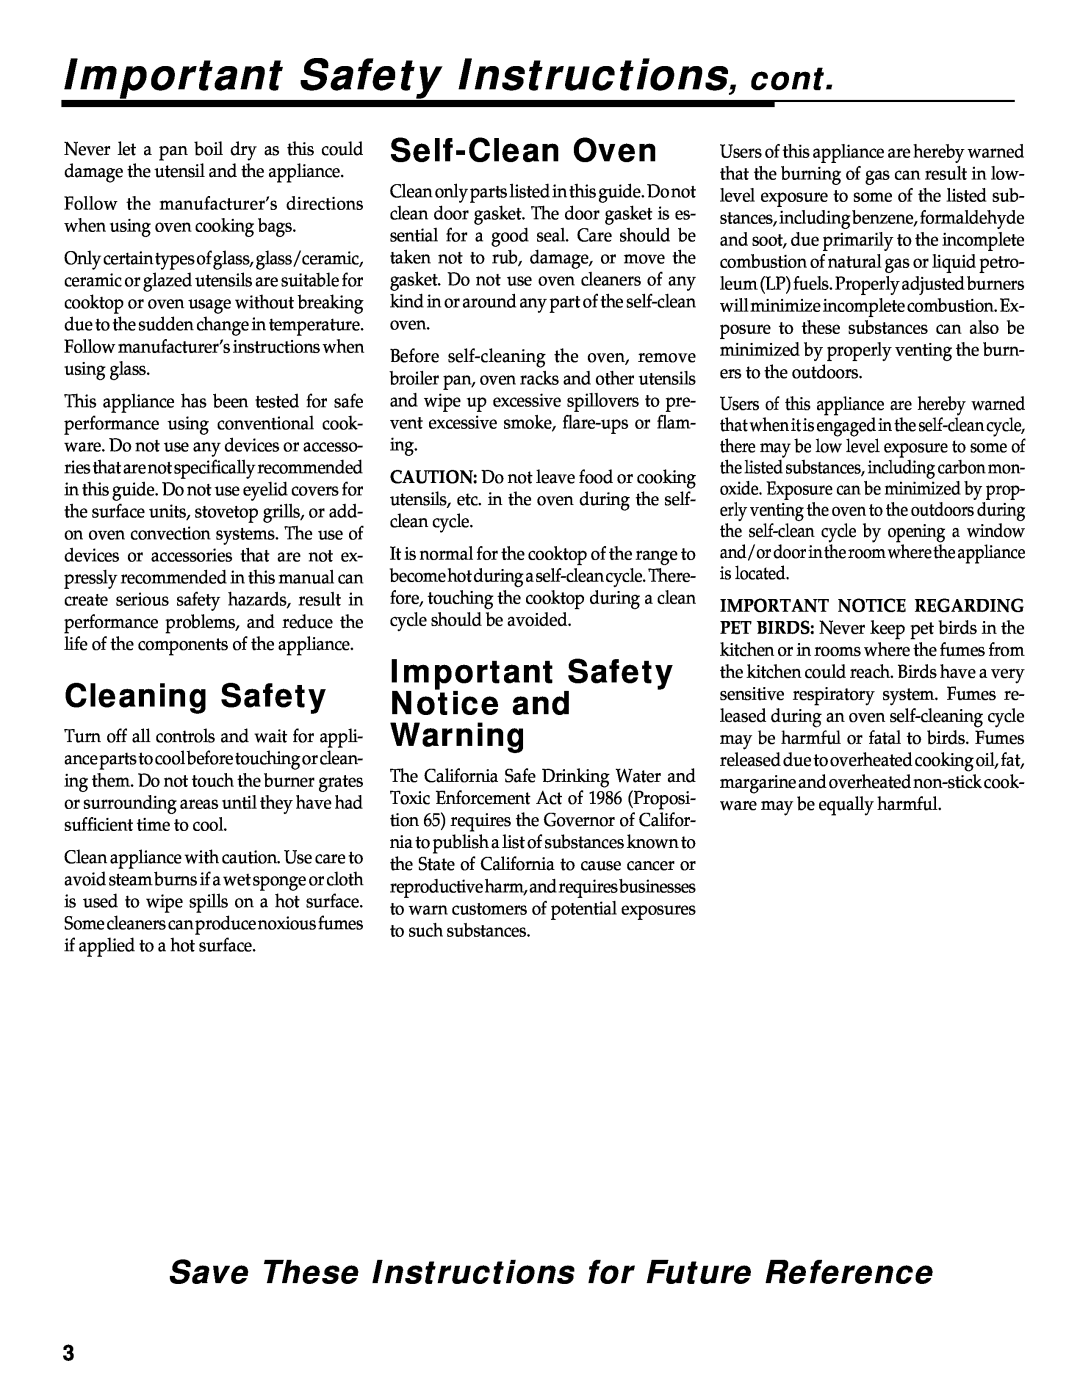 Maytag RS-1 manual Important Safety Instructions, cont, Cleaning Safety, Self-Clean Oven, Important Safety Notice and 